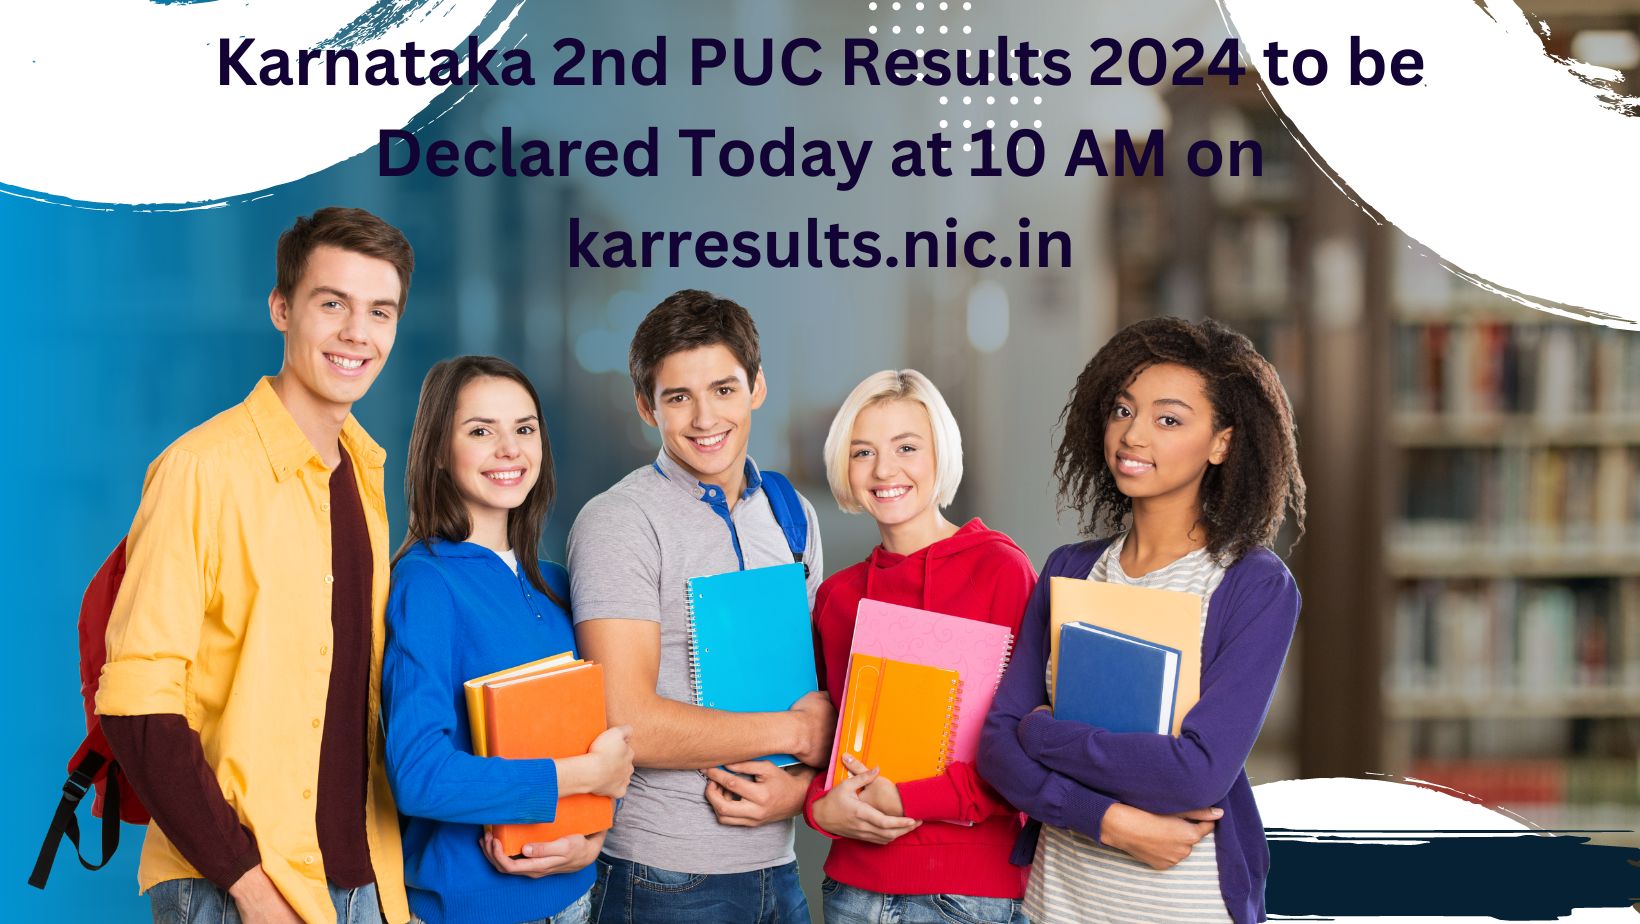 Karnataka 2nd PUC Results 2024 to be Declared Today at 10 AM on karresults.nic.in